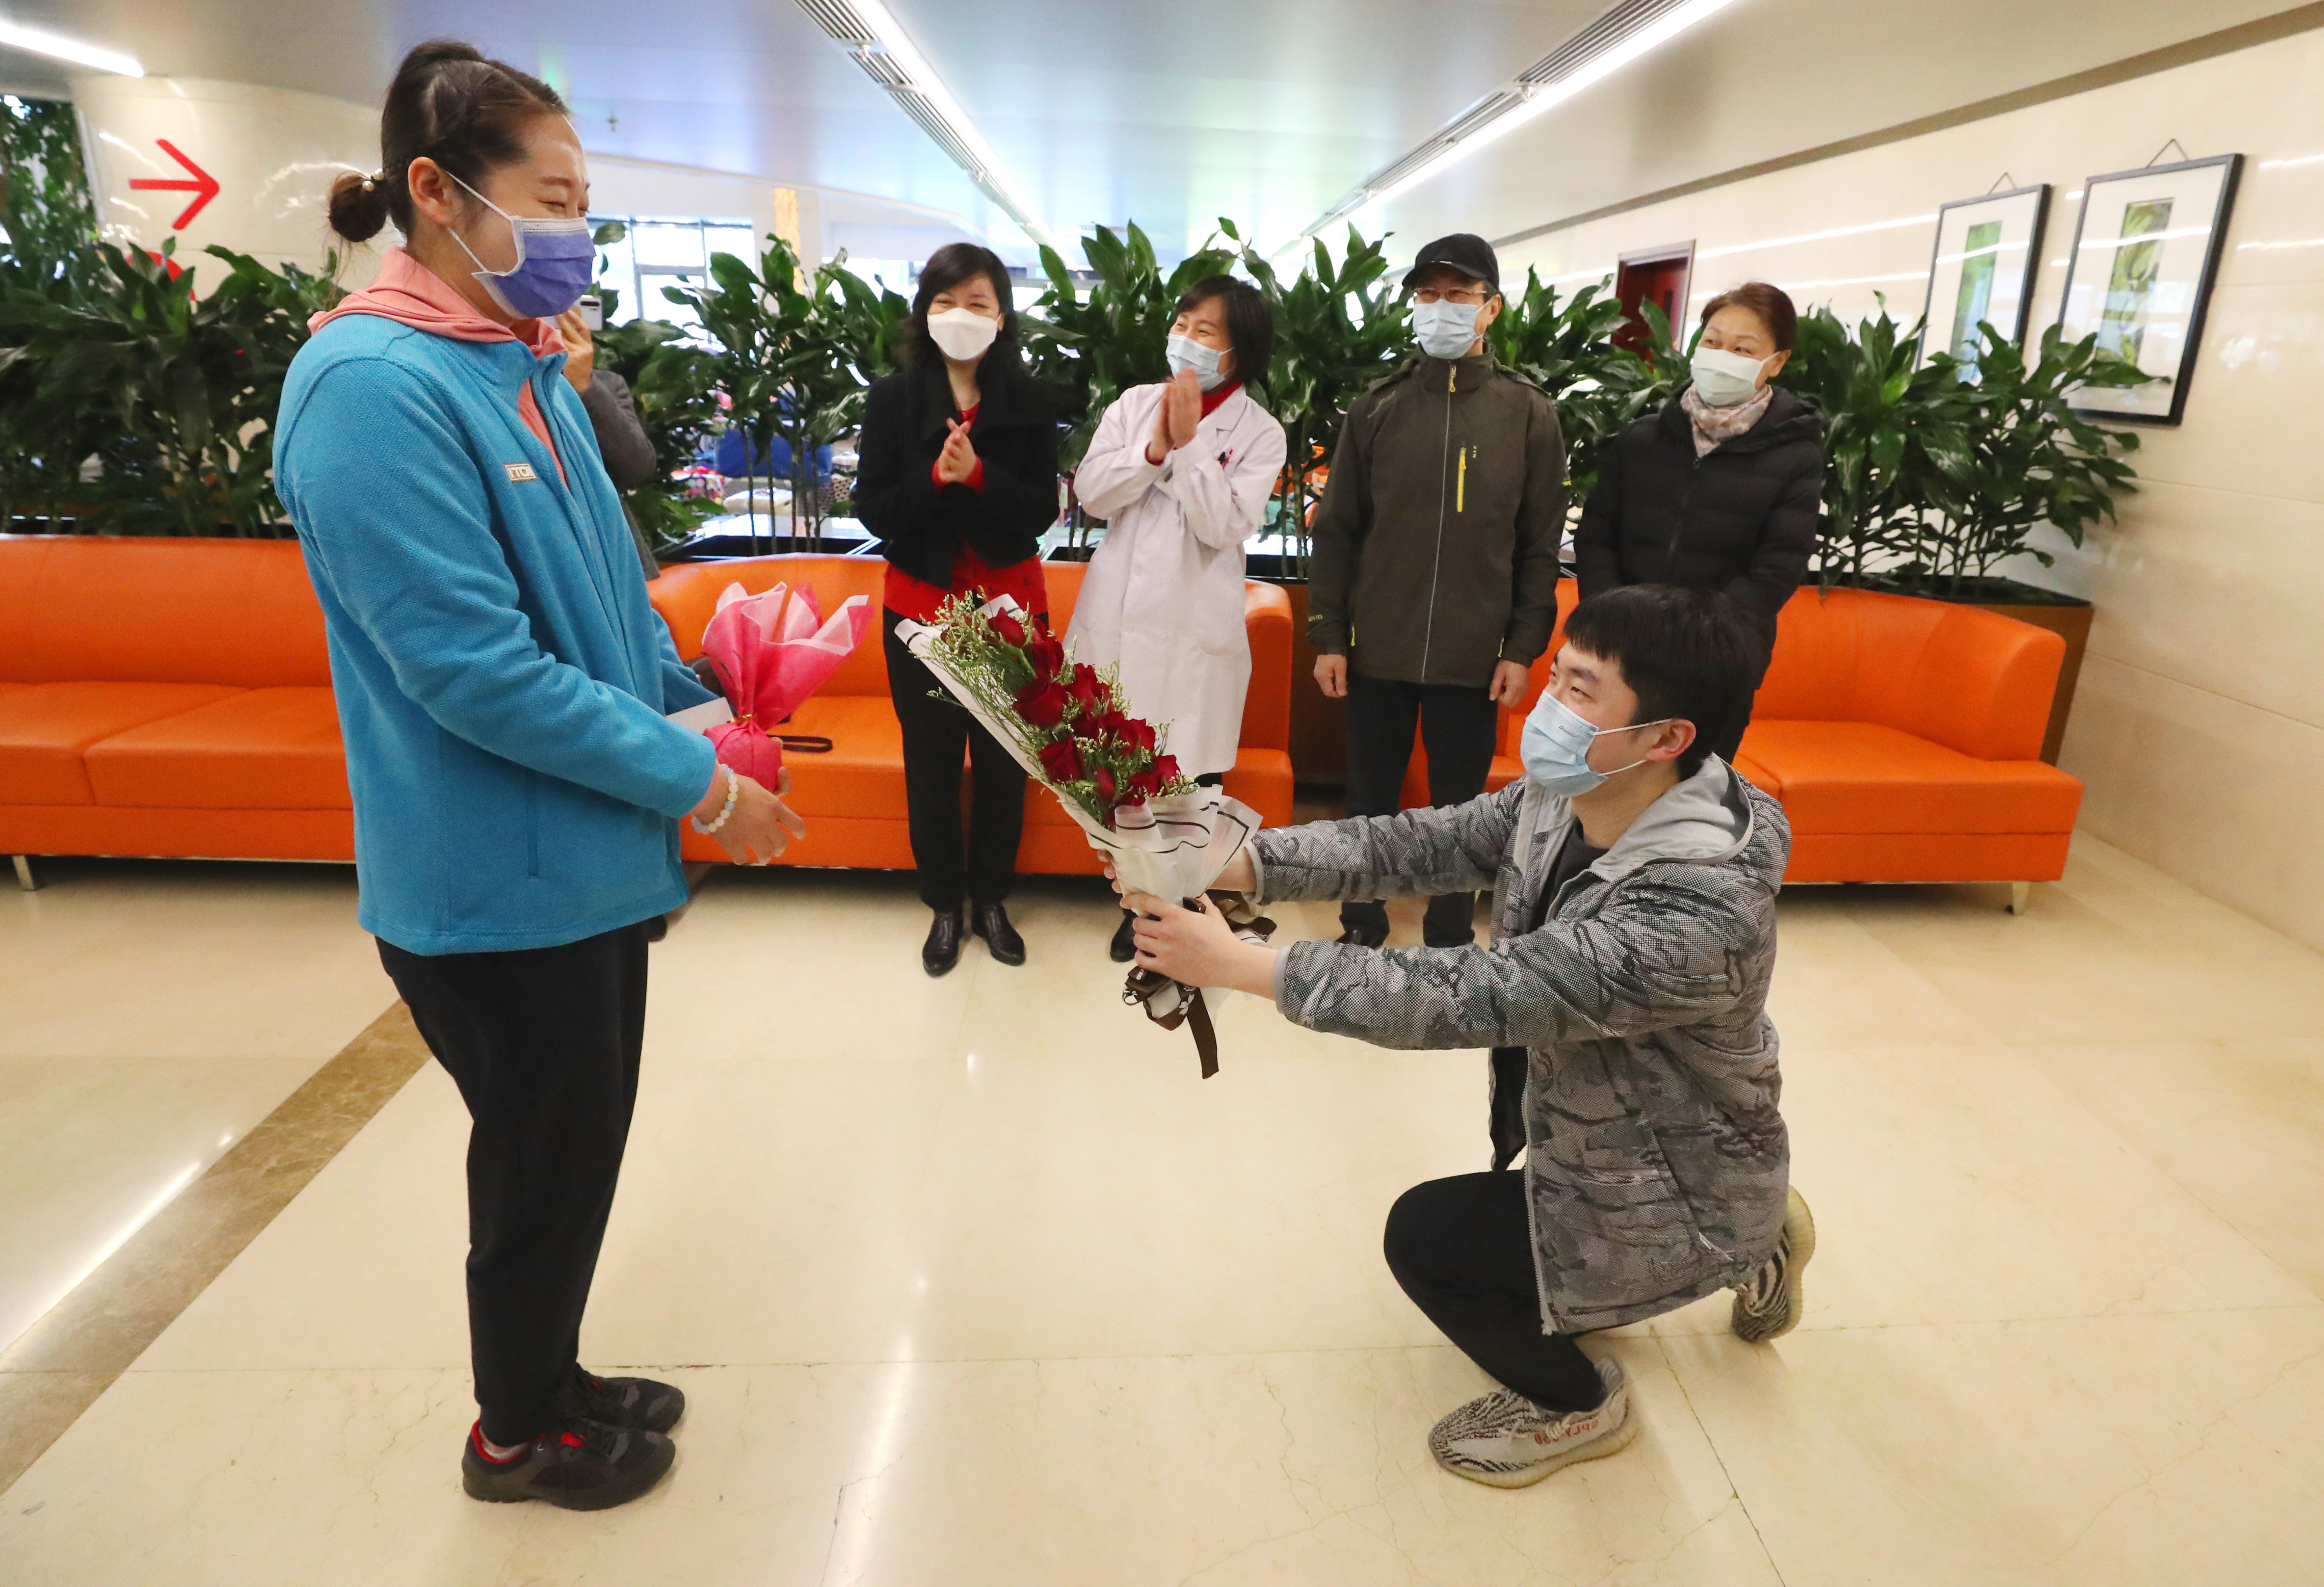 Yao Ningxin presents flowers to Cui at the hospital in Beijing on April 22. ZHU XINGXIN/CHINA DAILYShe had planned to marry fiance Yao Ningxin in early March. However, she had to delay the wedding as she worked at two makeshift hospitals in Wuhan and in the isolation ward of Tongji Hospital